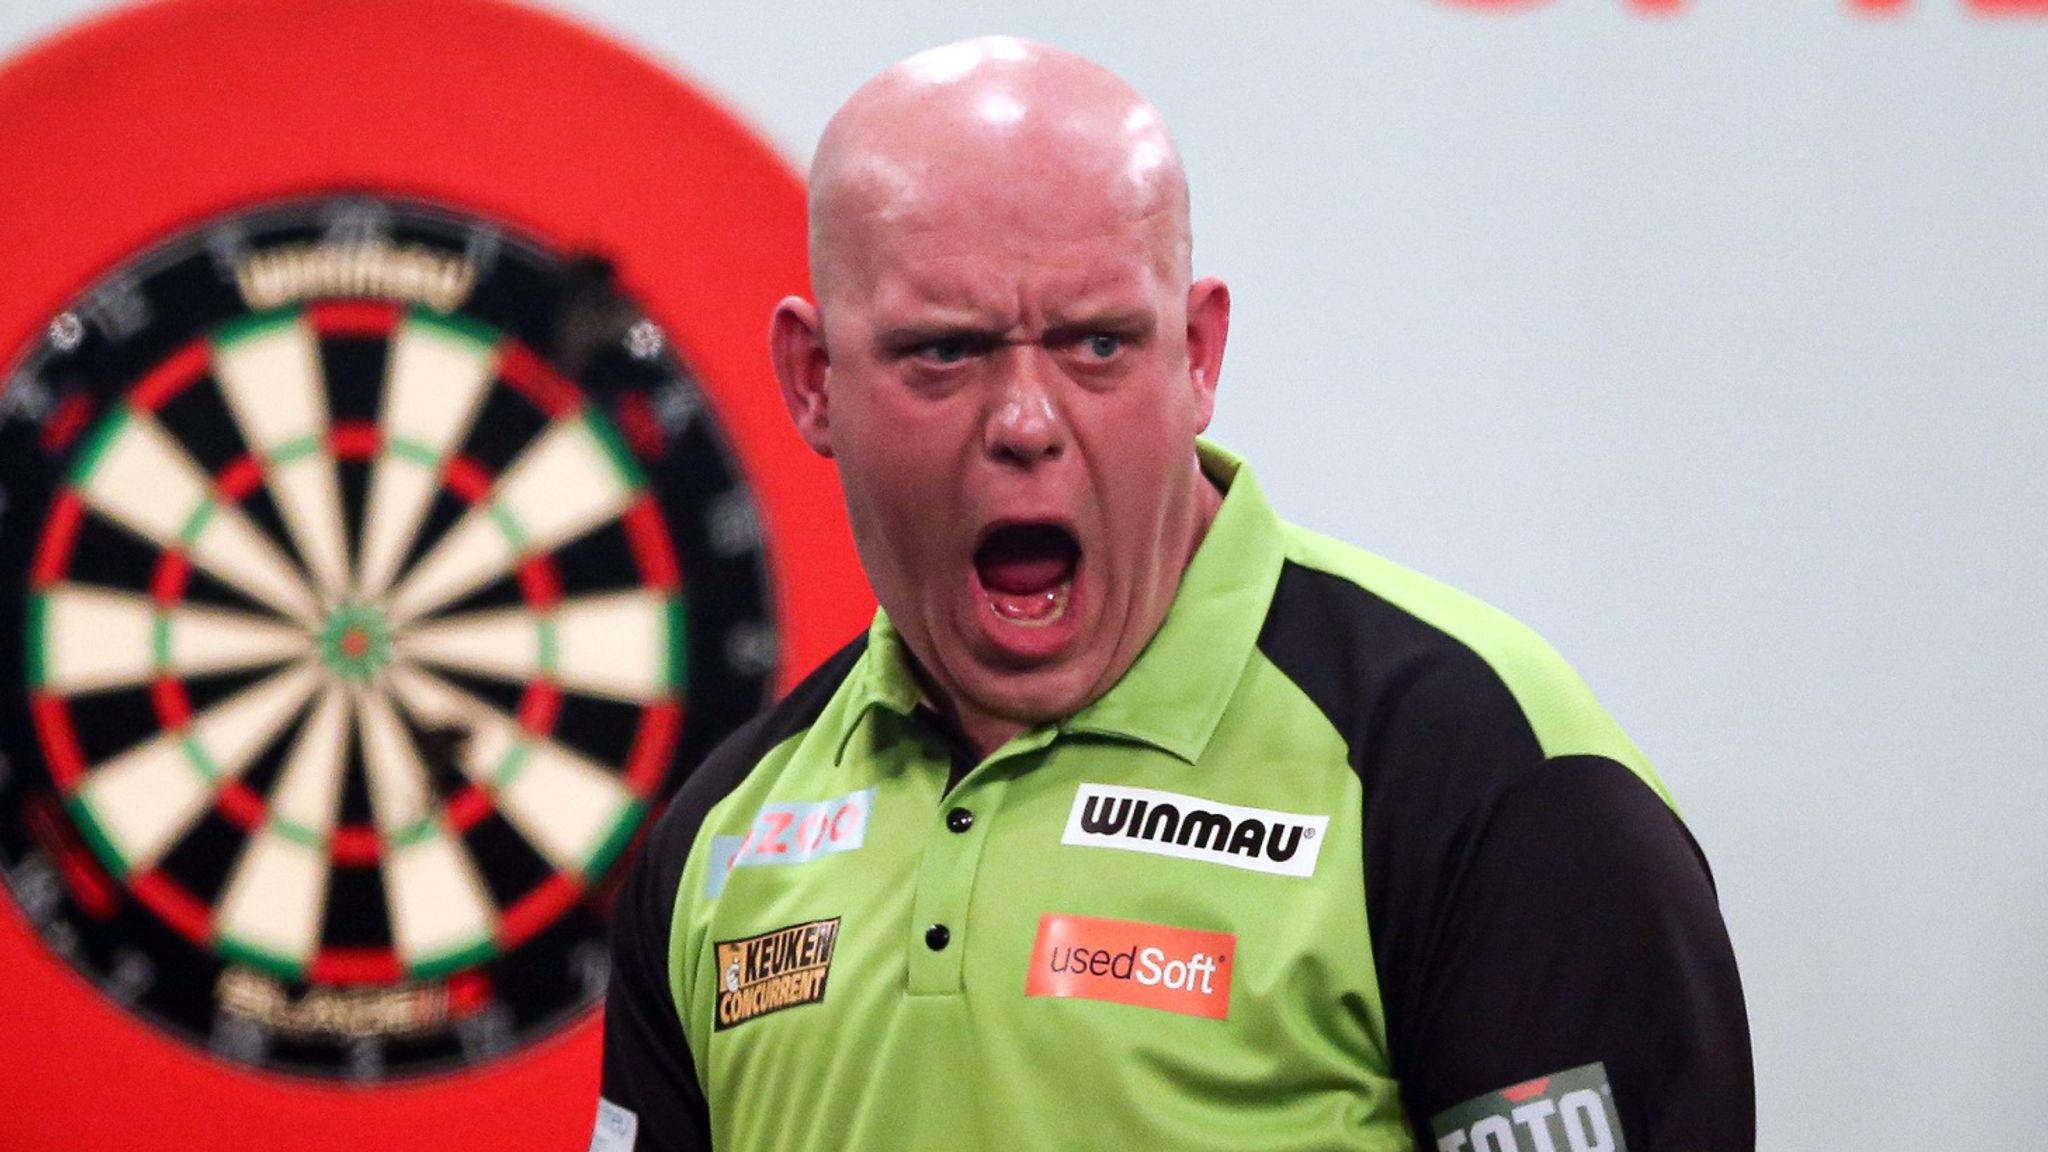 A darter has been changed and will miss the World Darts Championship